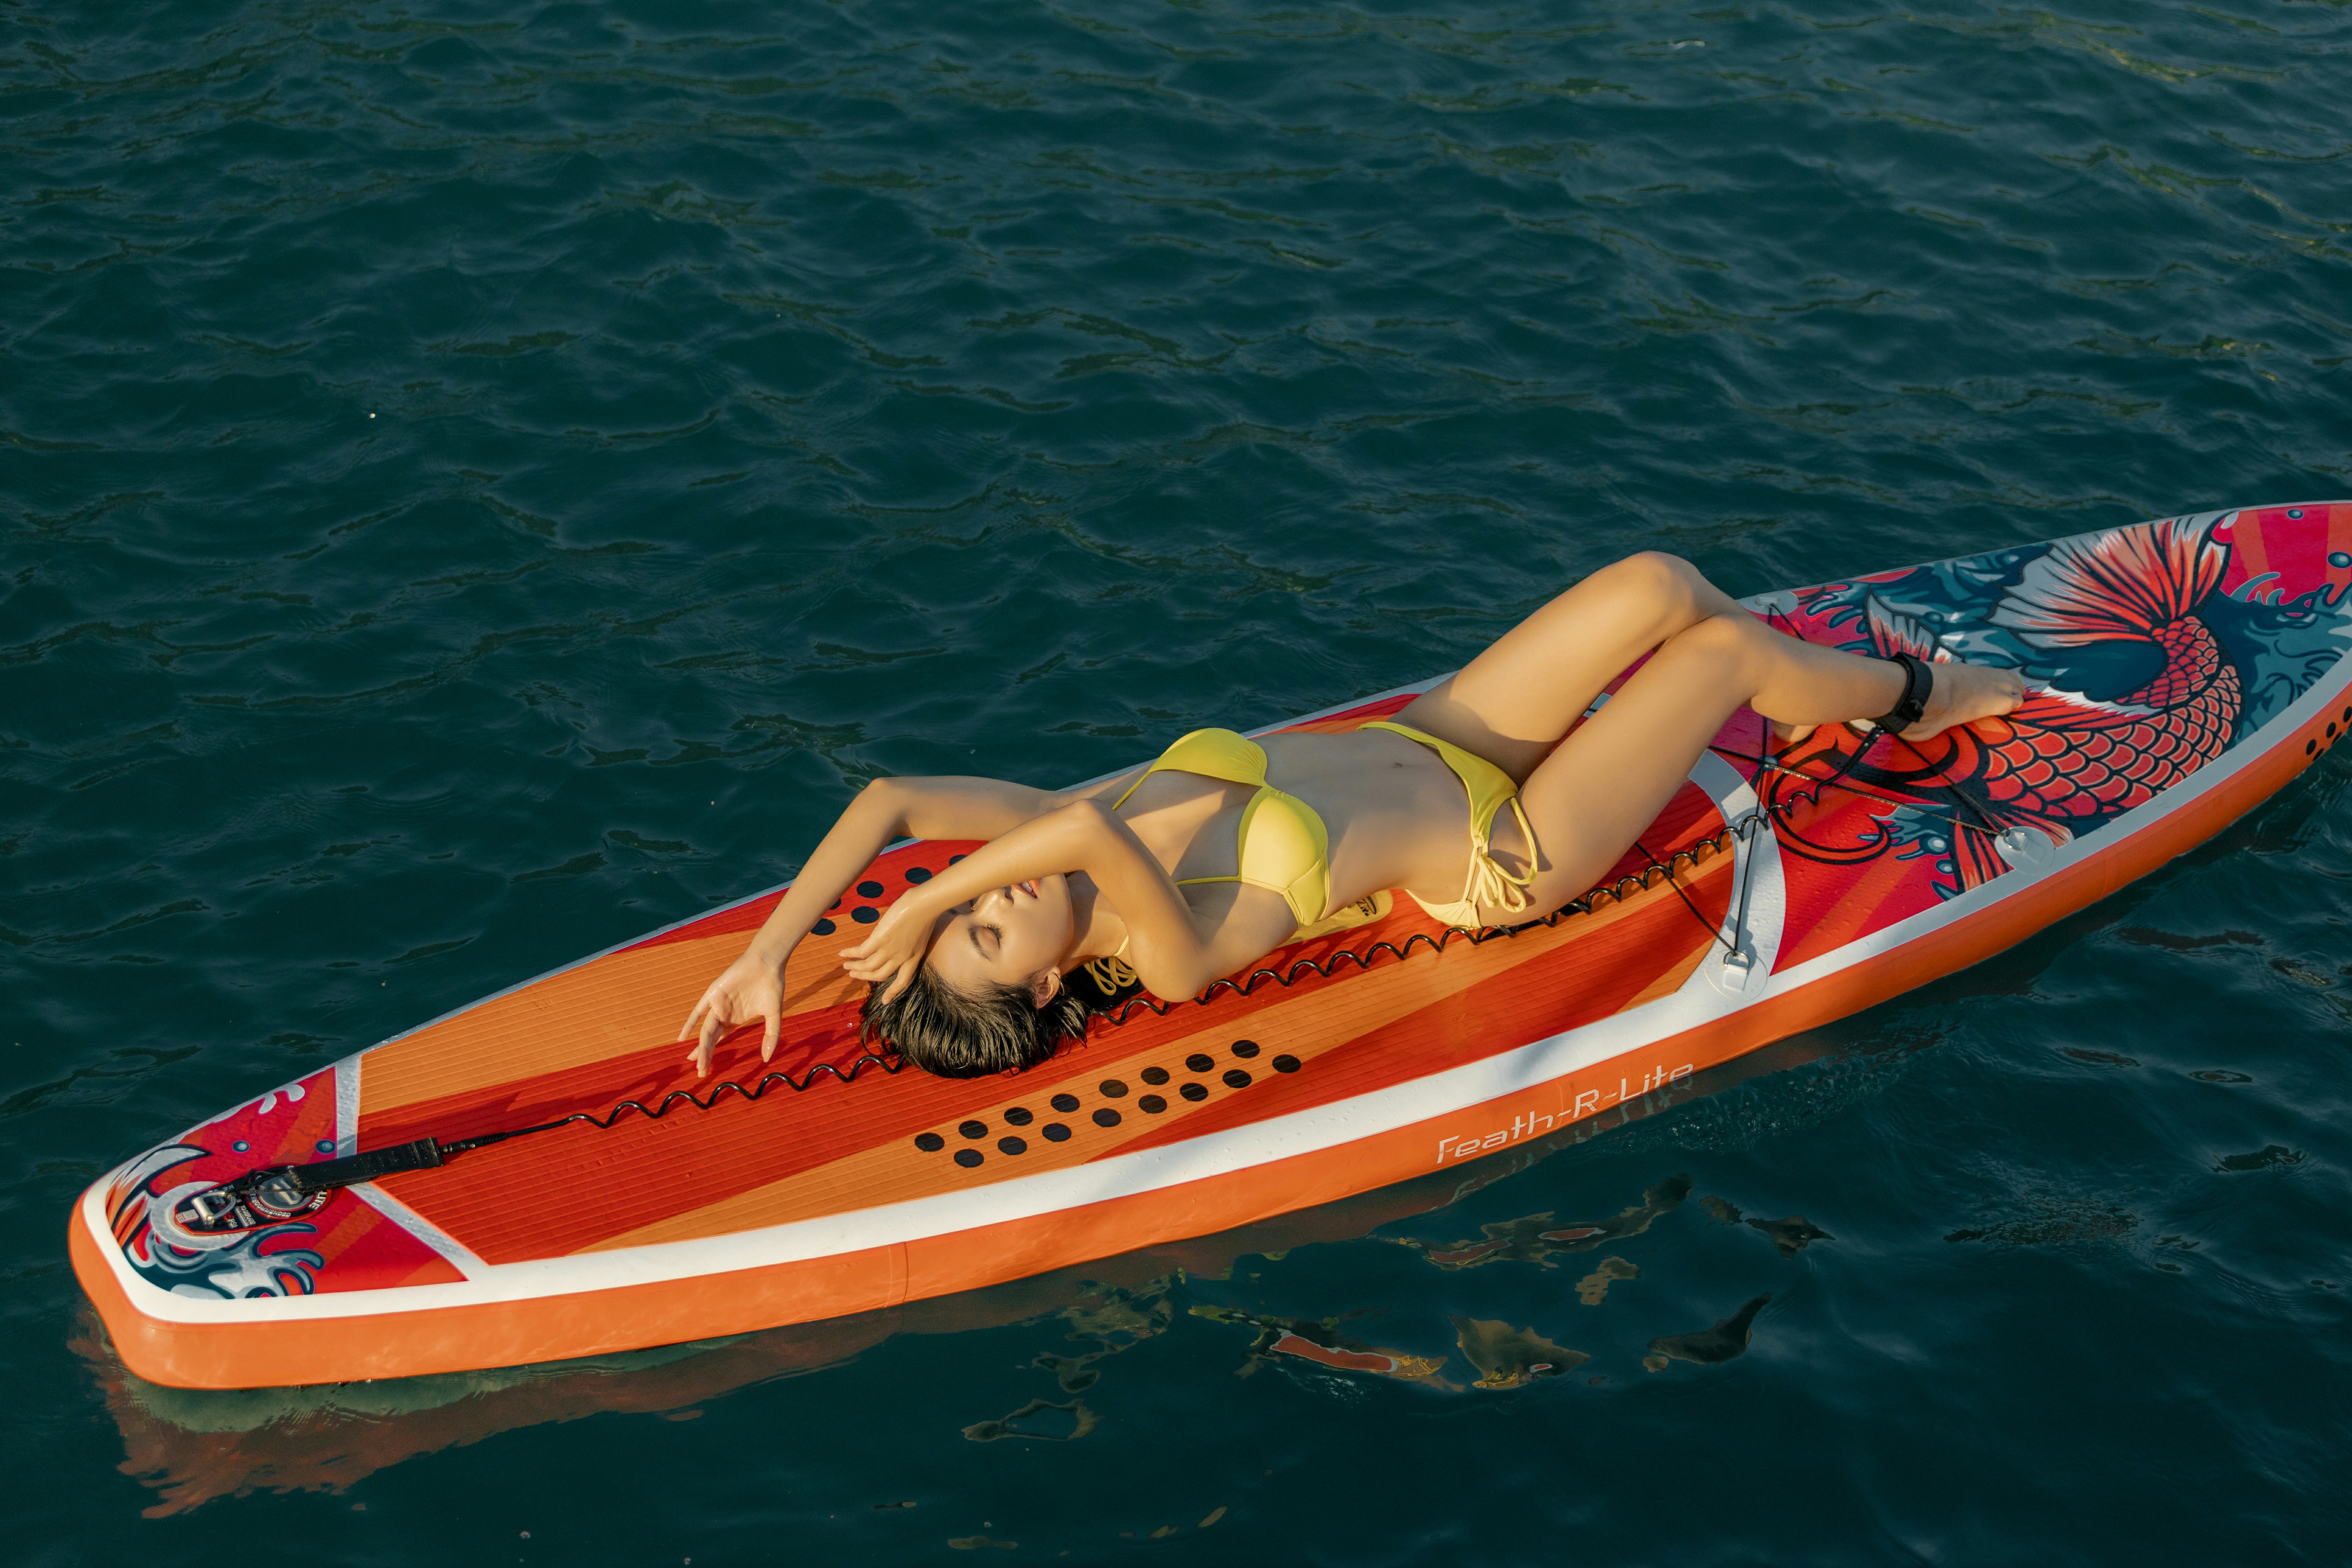 woman in red bikini lying on red and white surfboard on body of water during daytime